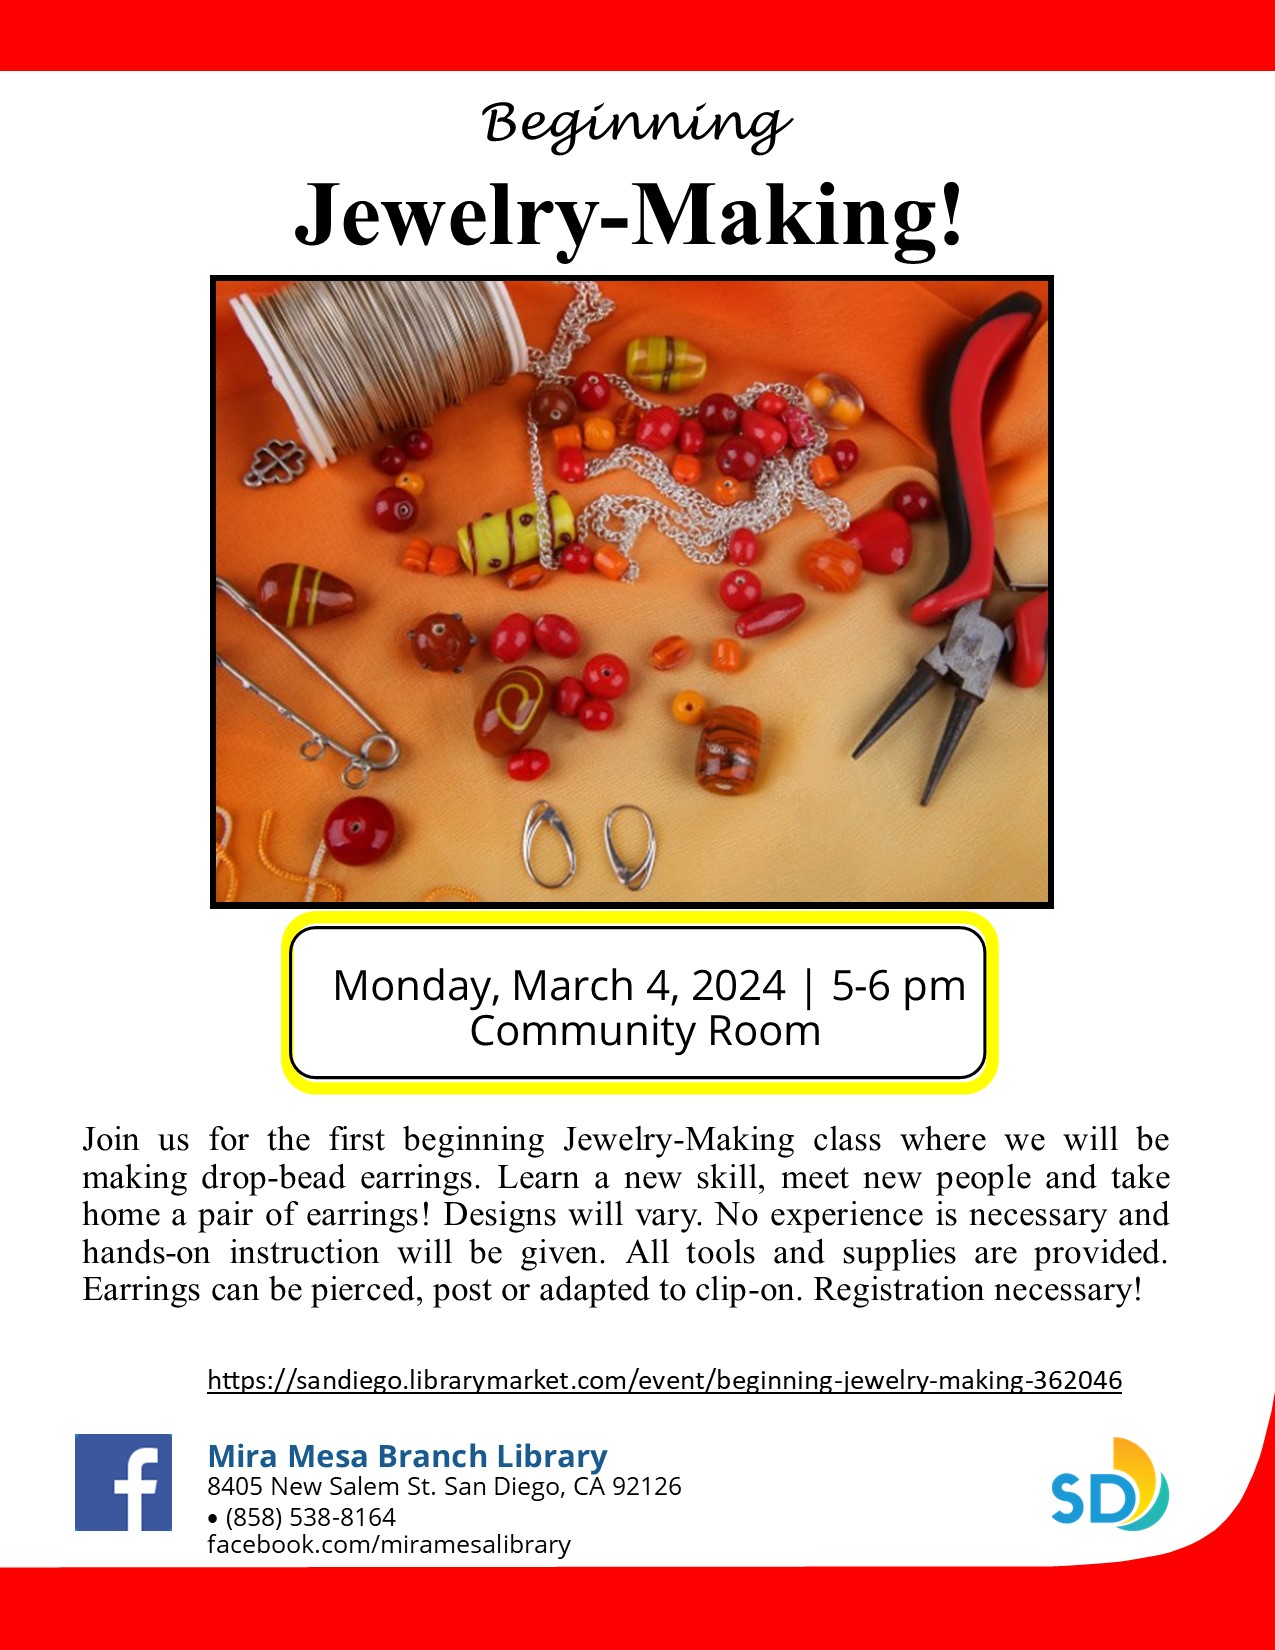 Flyer with red beads and jewelry making tools in a rectangle